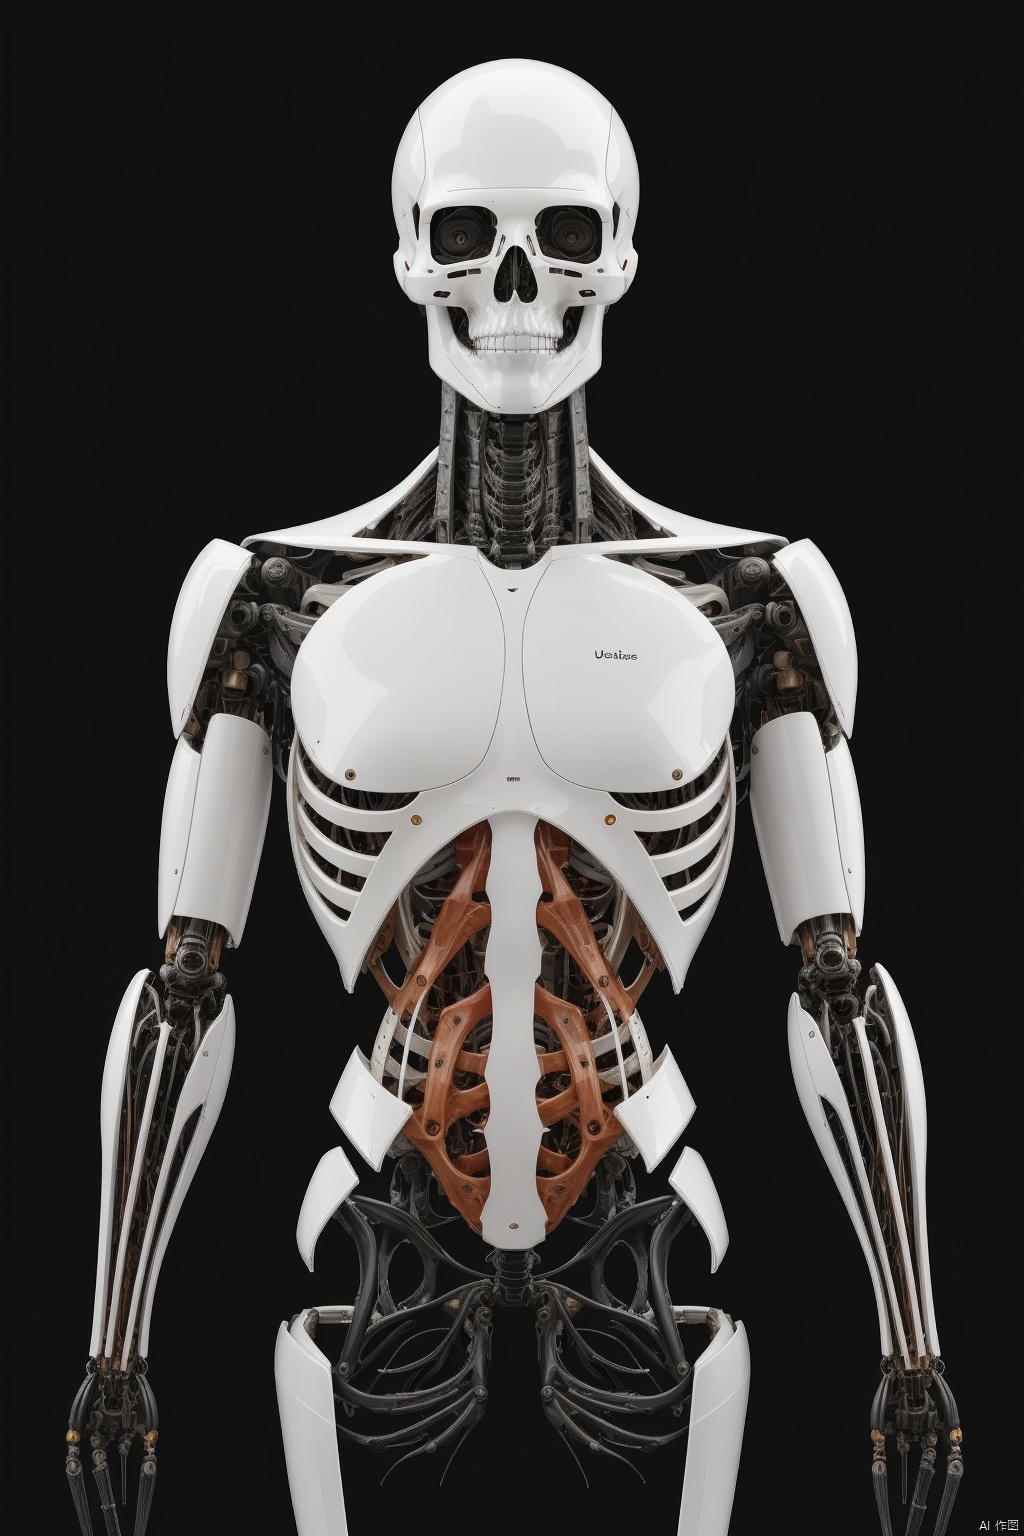  White robot ,Front view of the robot,White background, english text, no humans, watermark, robot, mecha, science fiction, realistic, skeleton, non-humanoid robot, spine,Ribs, ulna, sternum, scapula, clavicle, mandible,Bionic muscle. Transparent skin. Transparent muscle.